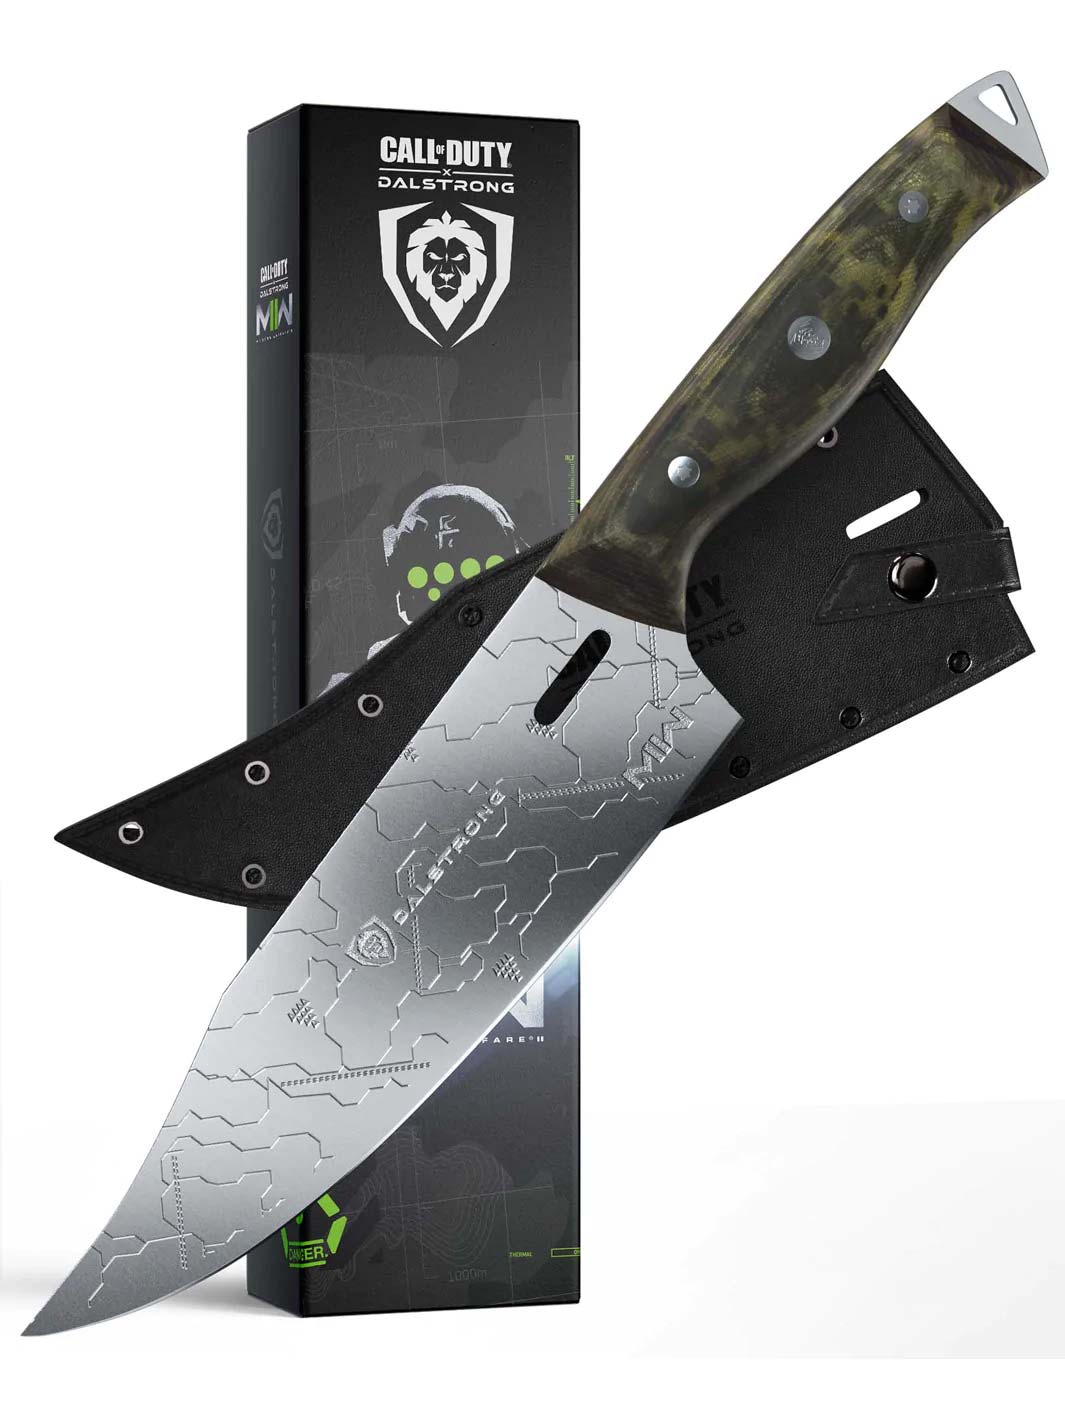 Dalstrong call of duty series 8 inch chef knife in front of it's premium packaging.